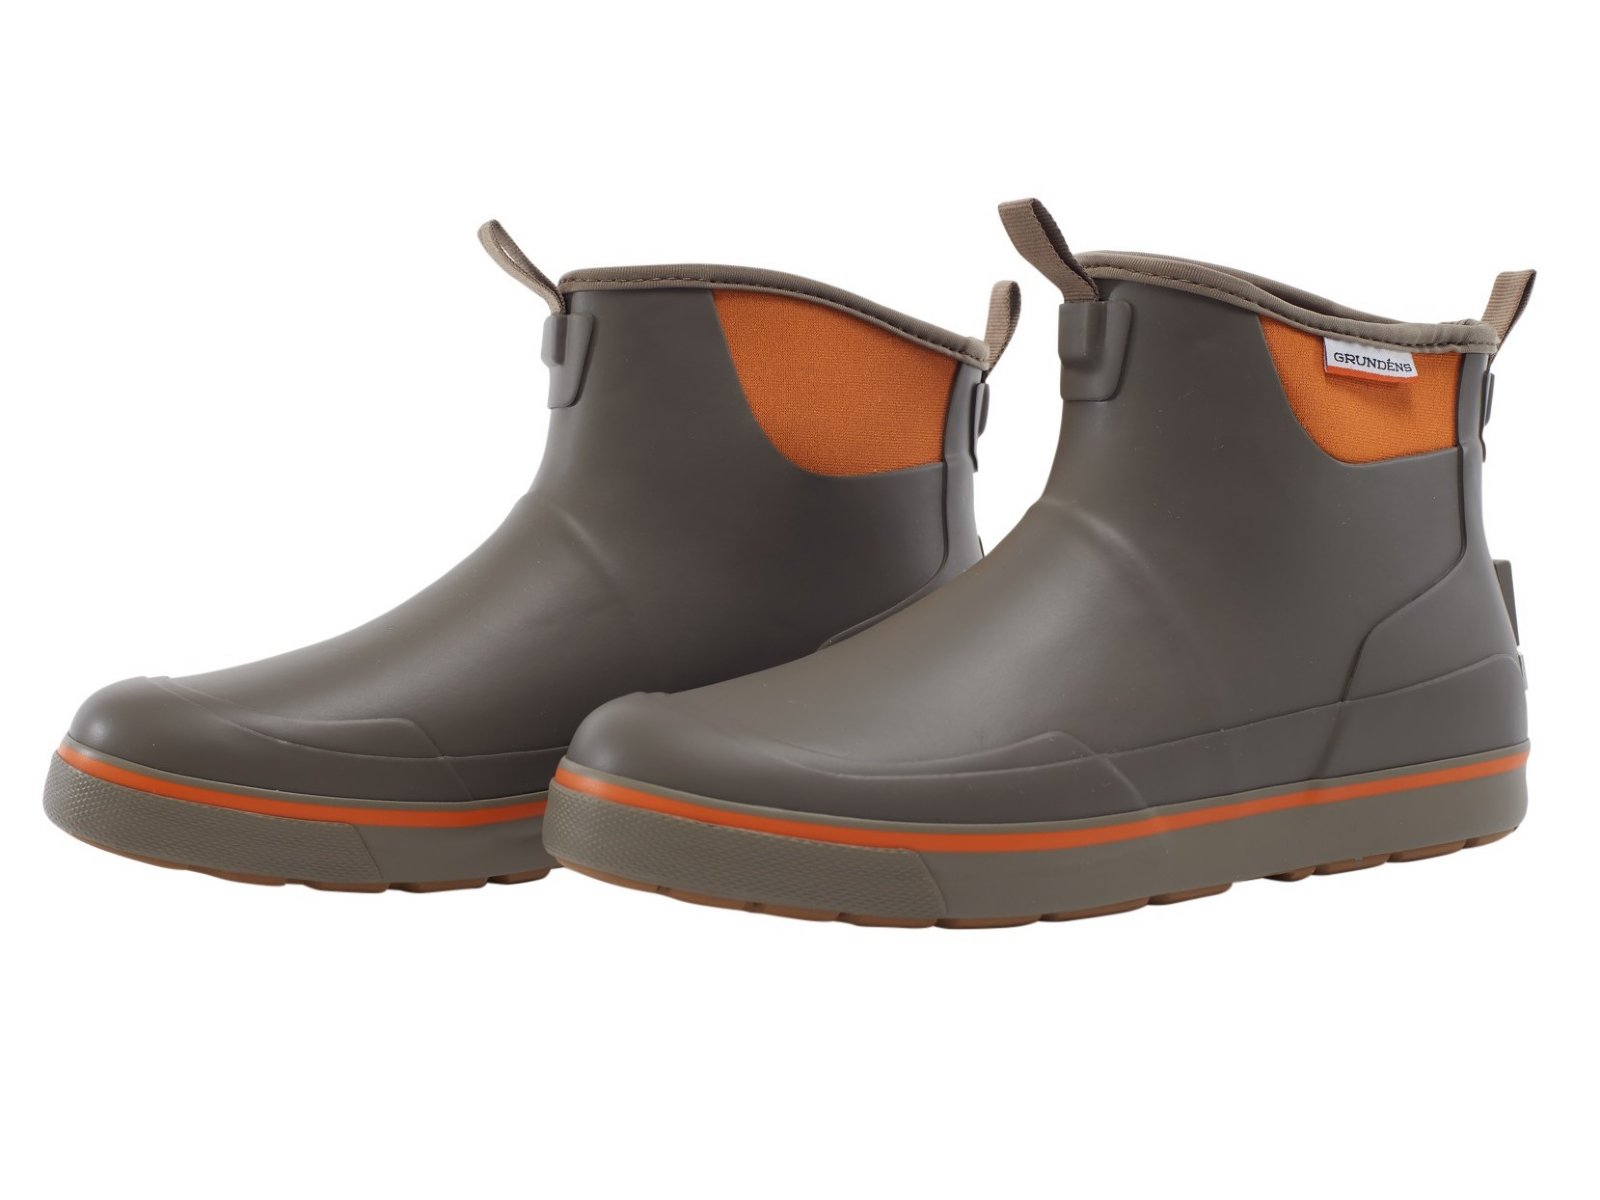 Grundens Deck-Boss Ankle Boot - Brindle